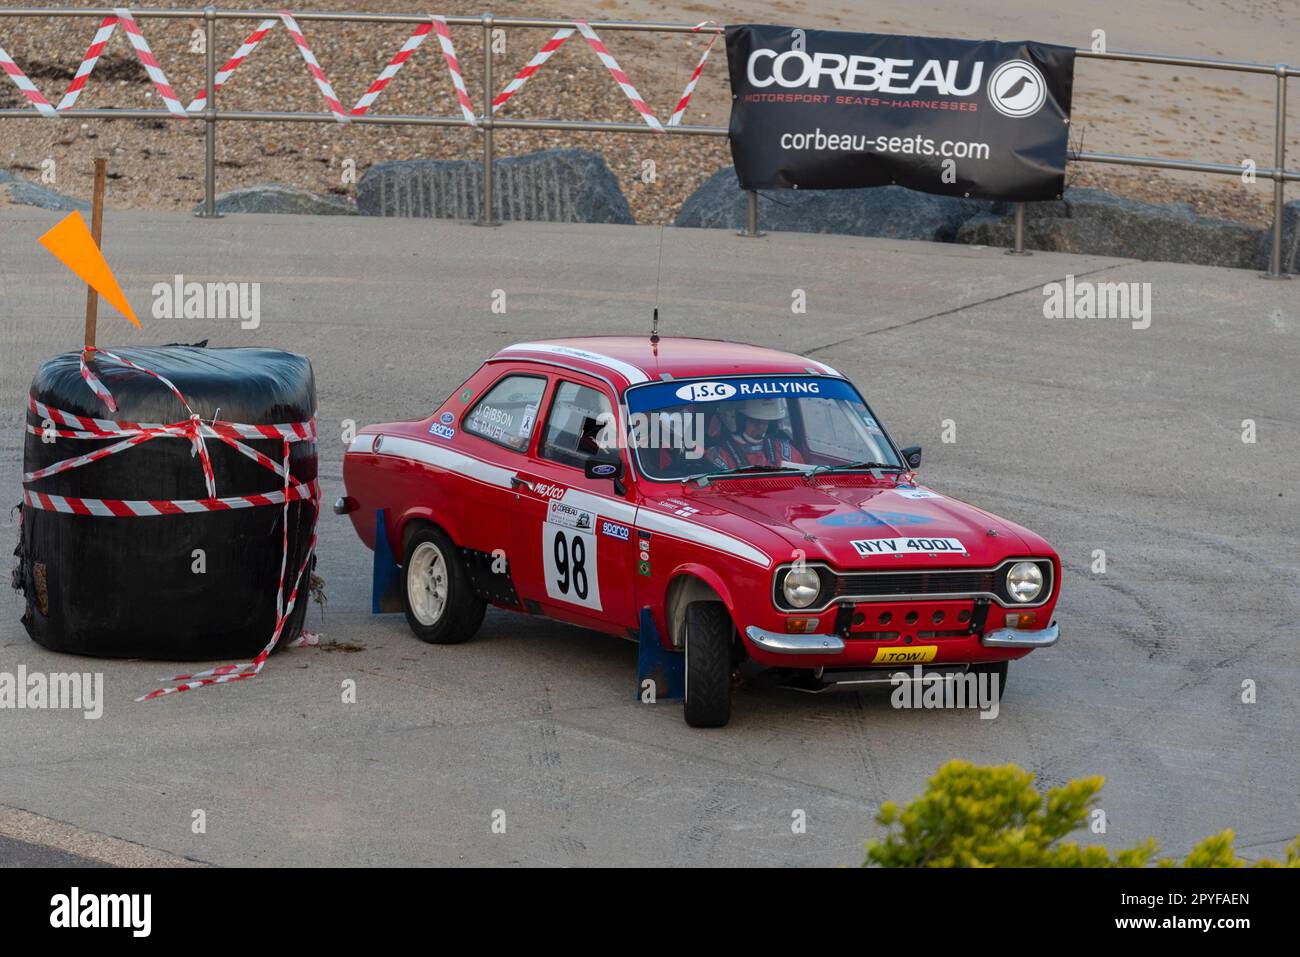 John Gibson racing a 1972 Ford Escort Mk1 Mexico competing in the Corbeau Seats rally on the seafront at Clacton, Essex, UK. Co driver Steven Davey Stock Photo